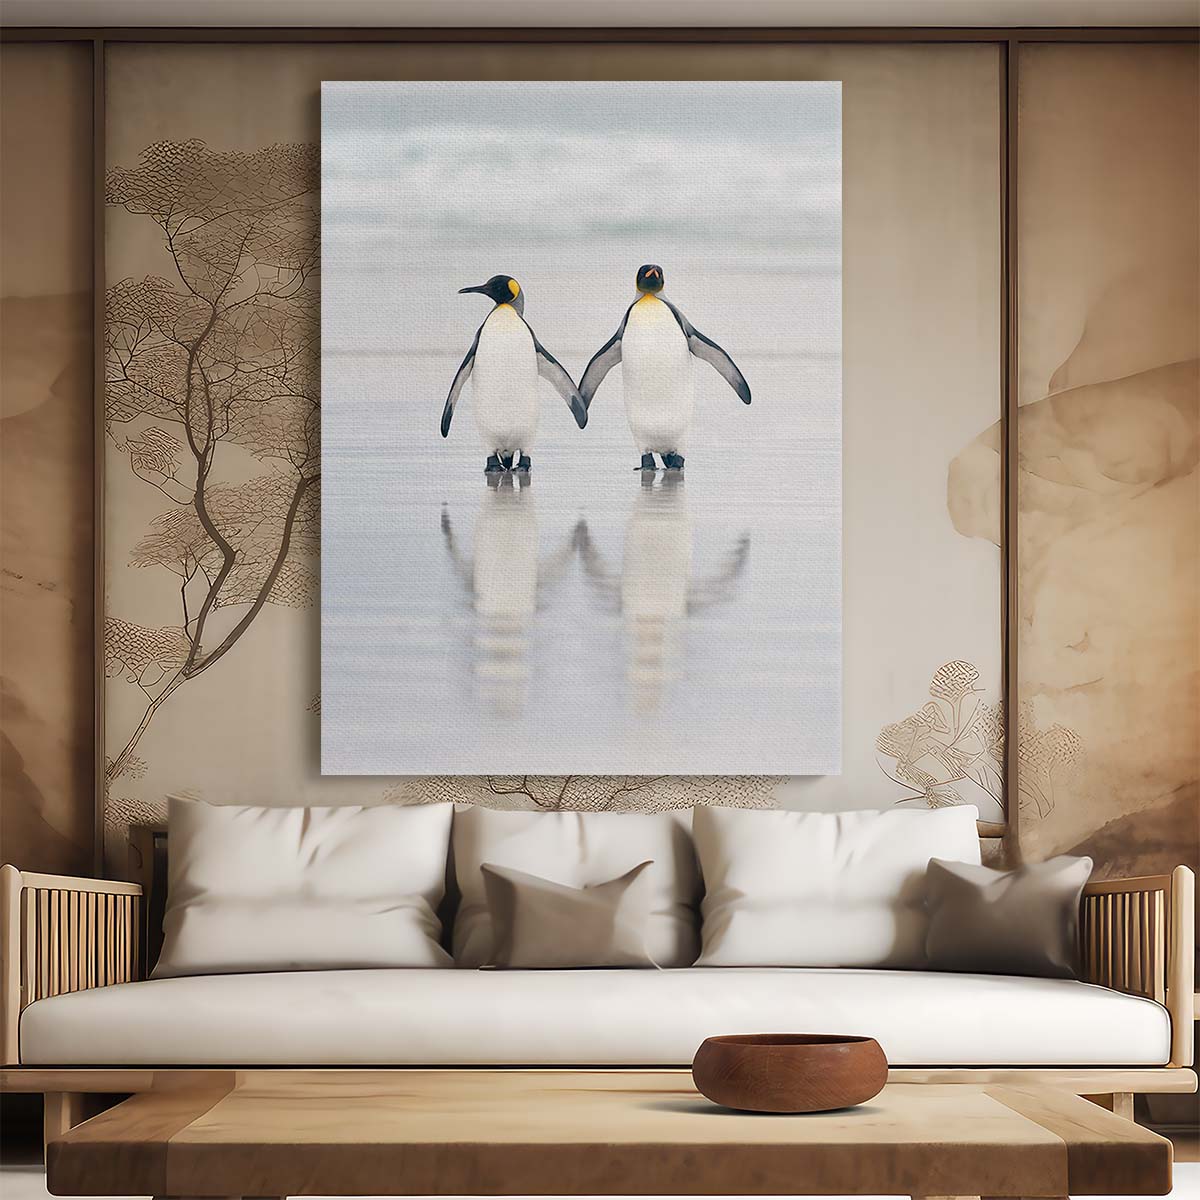 Romantic Penguin Couple Beach Photography, Wildlife Coastal Art by Luxuriance Designs, made in USA